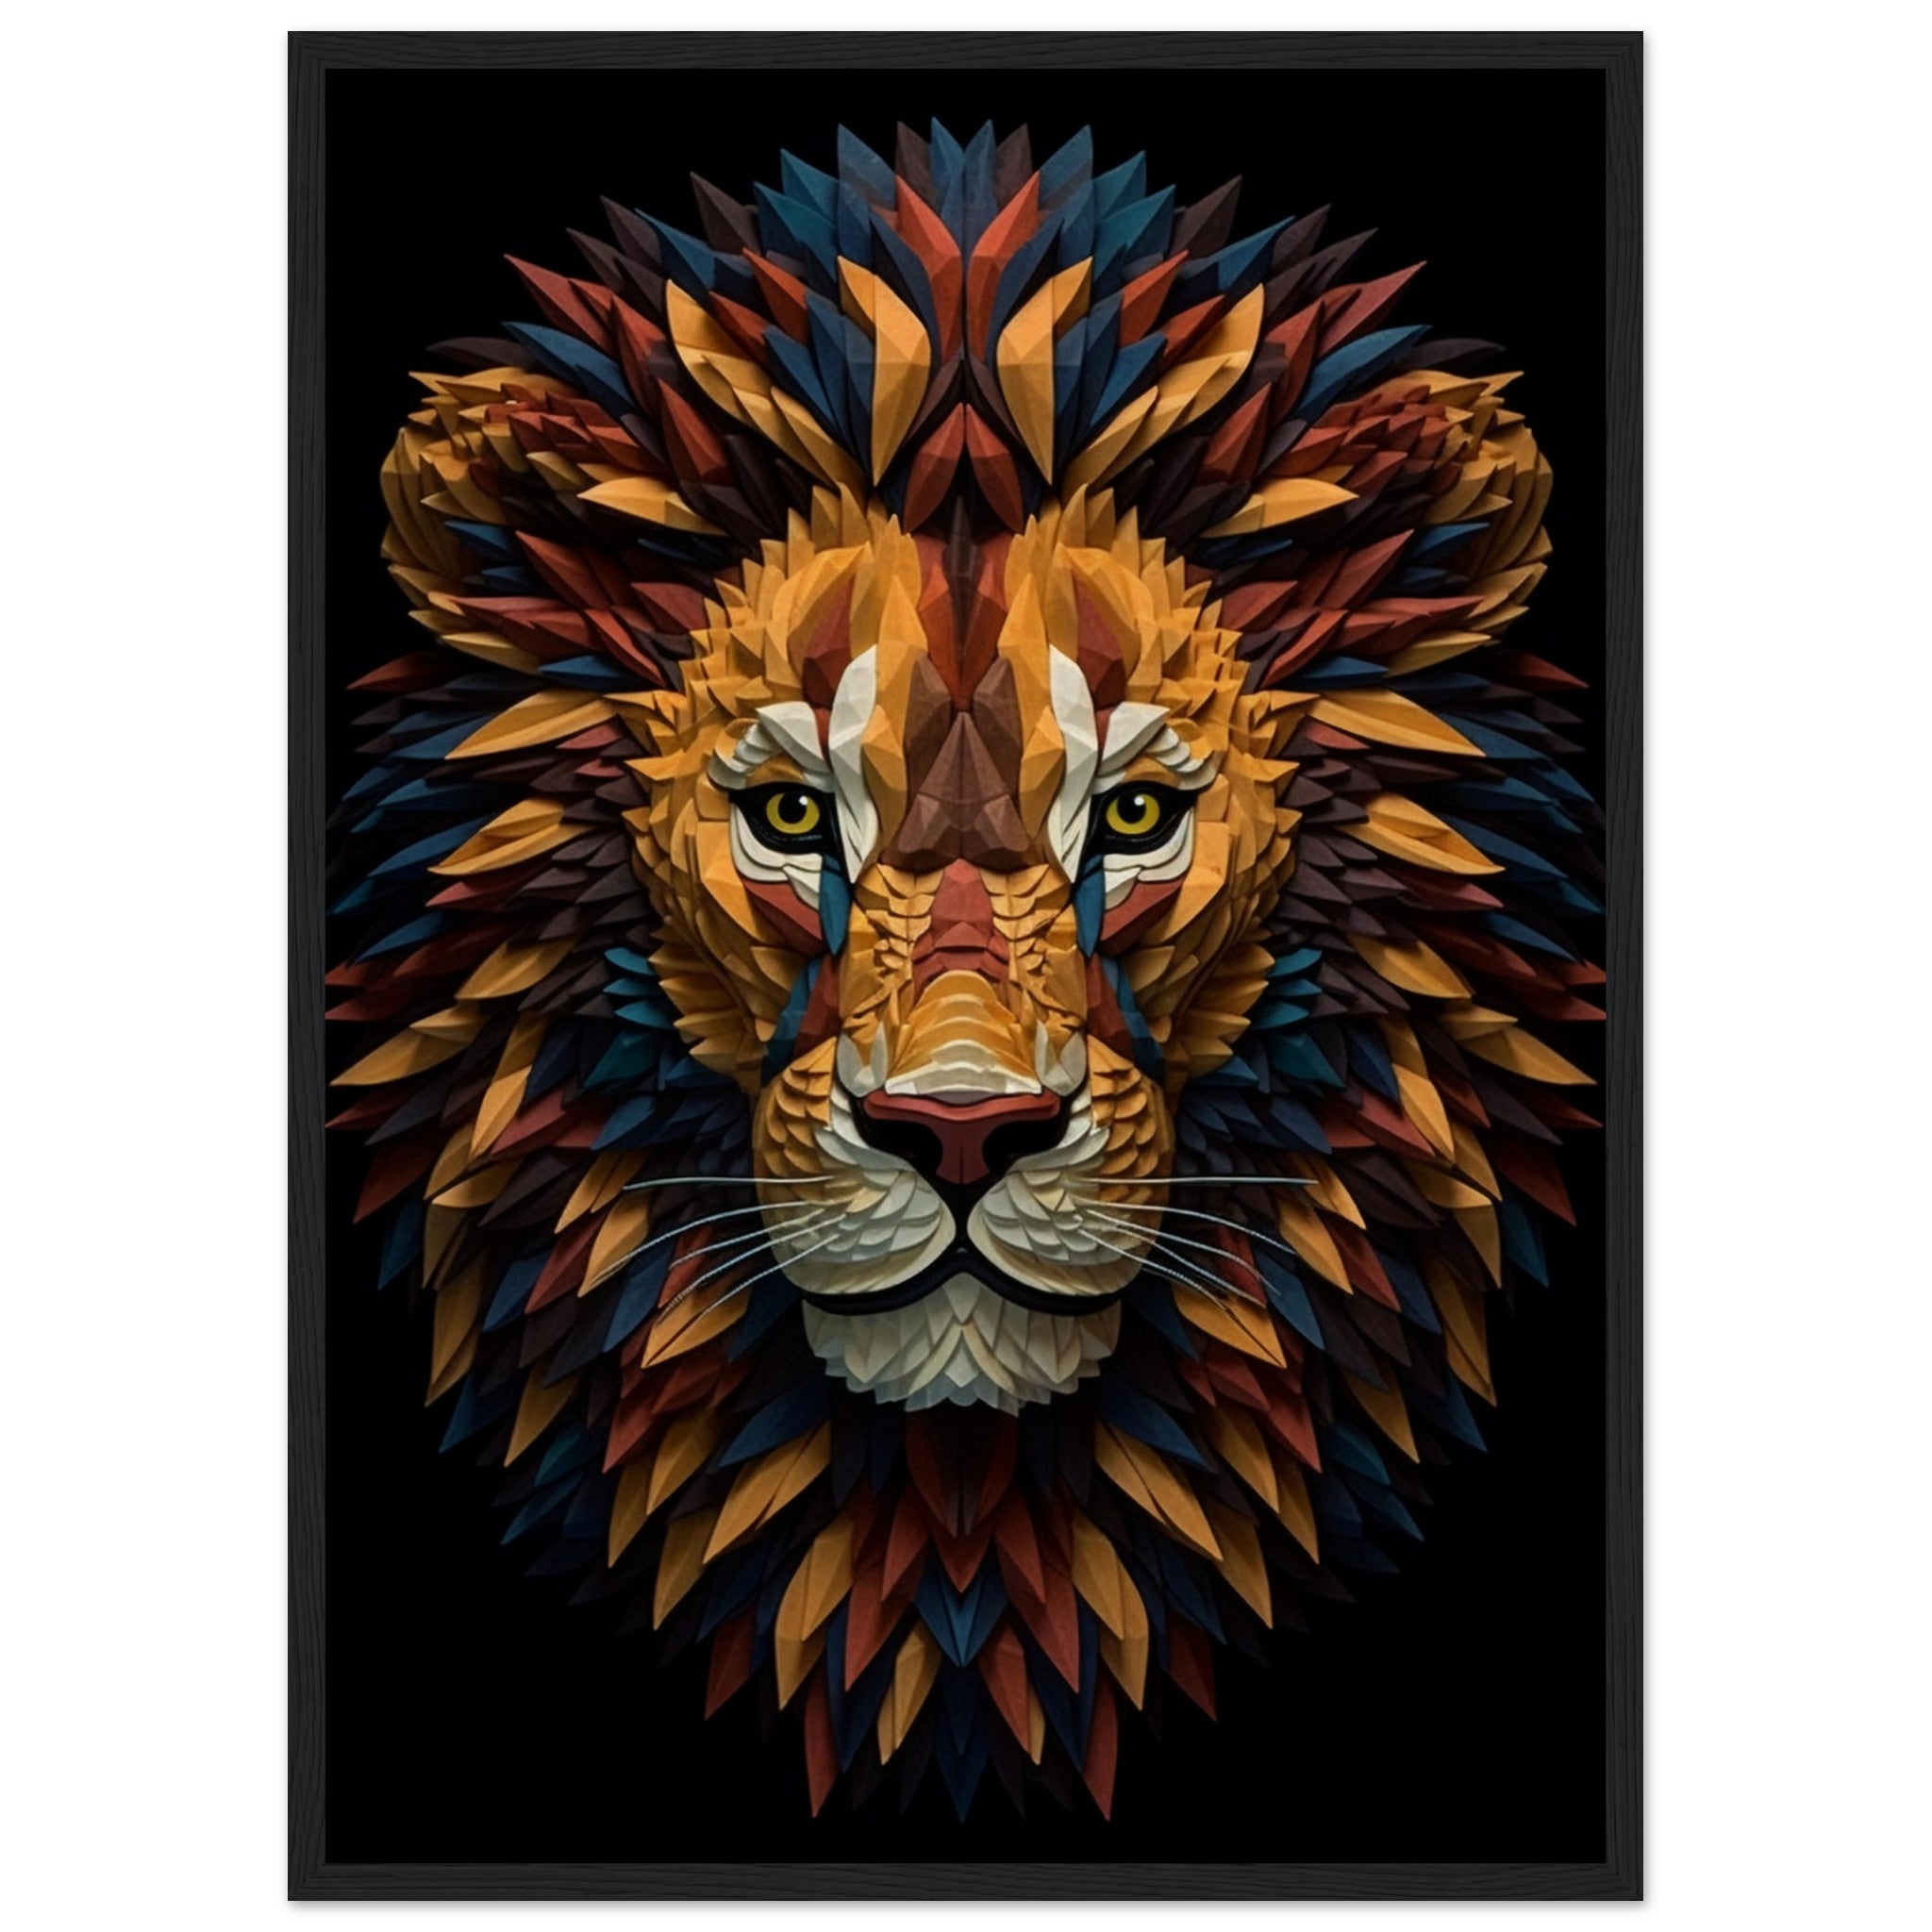 Geometric lion face - immersiarts